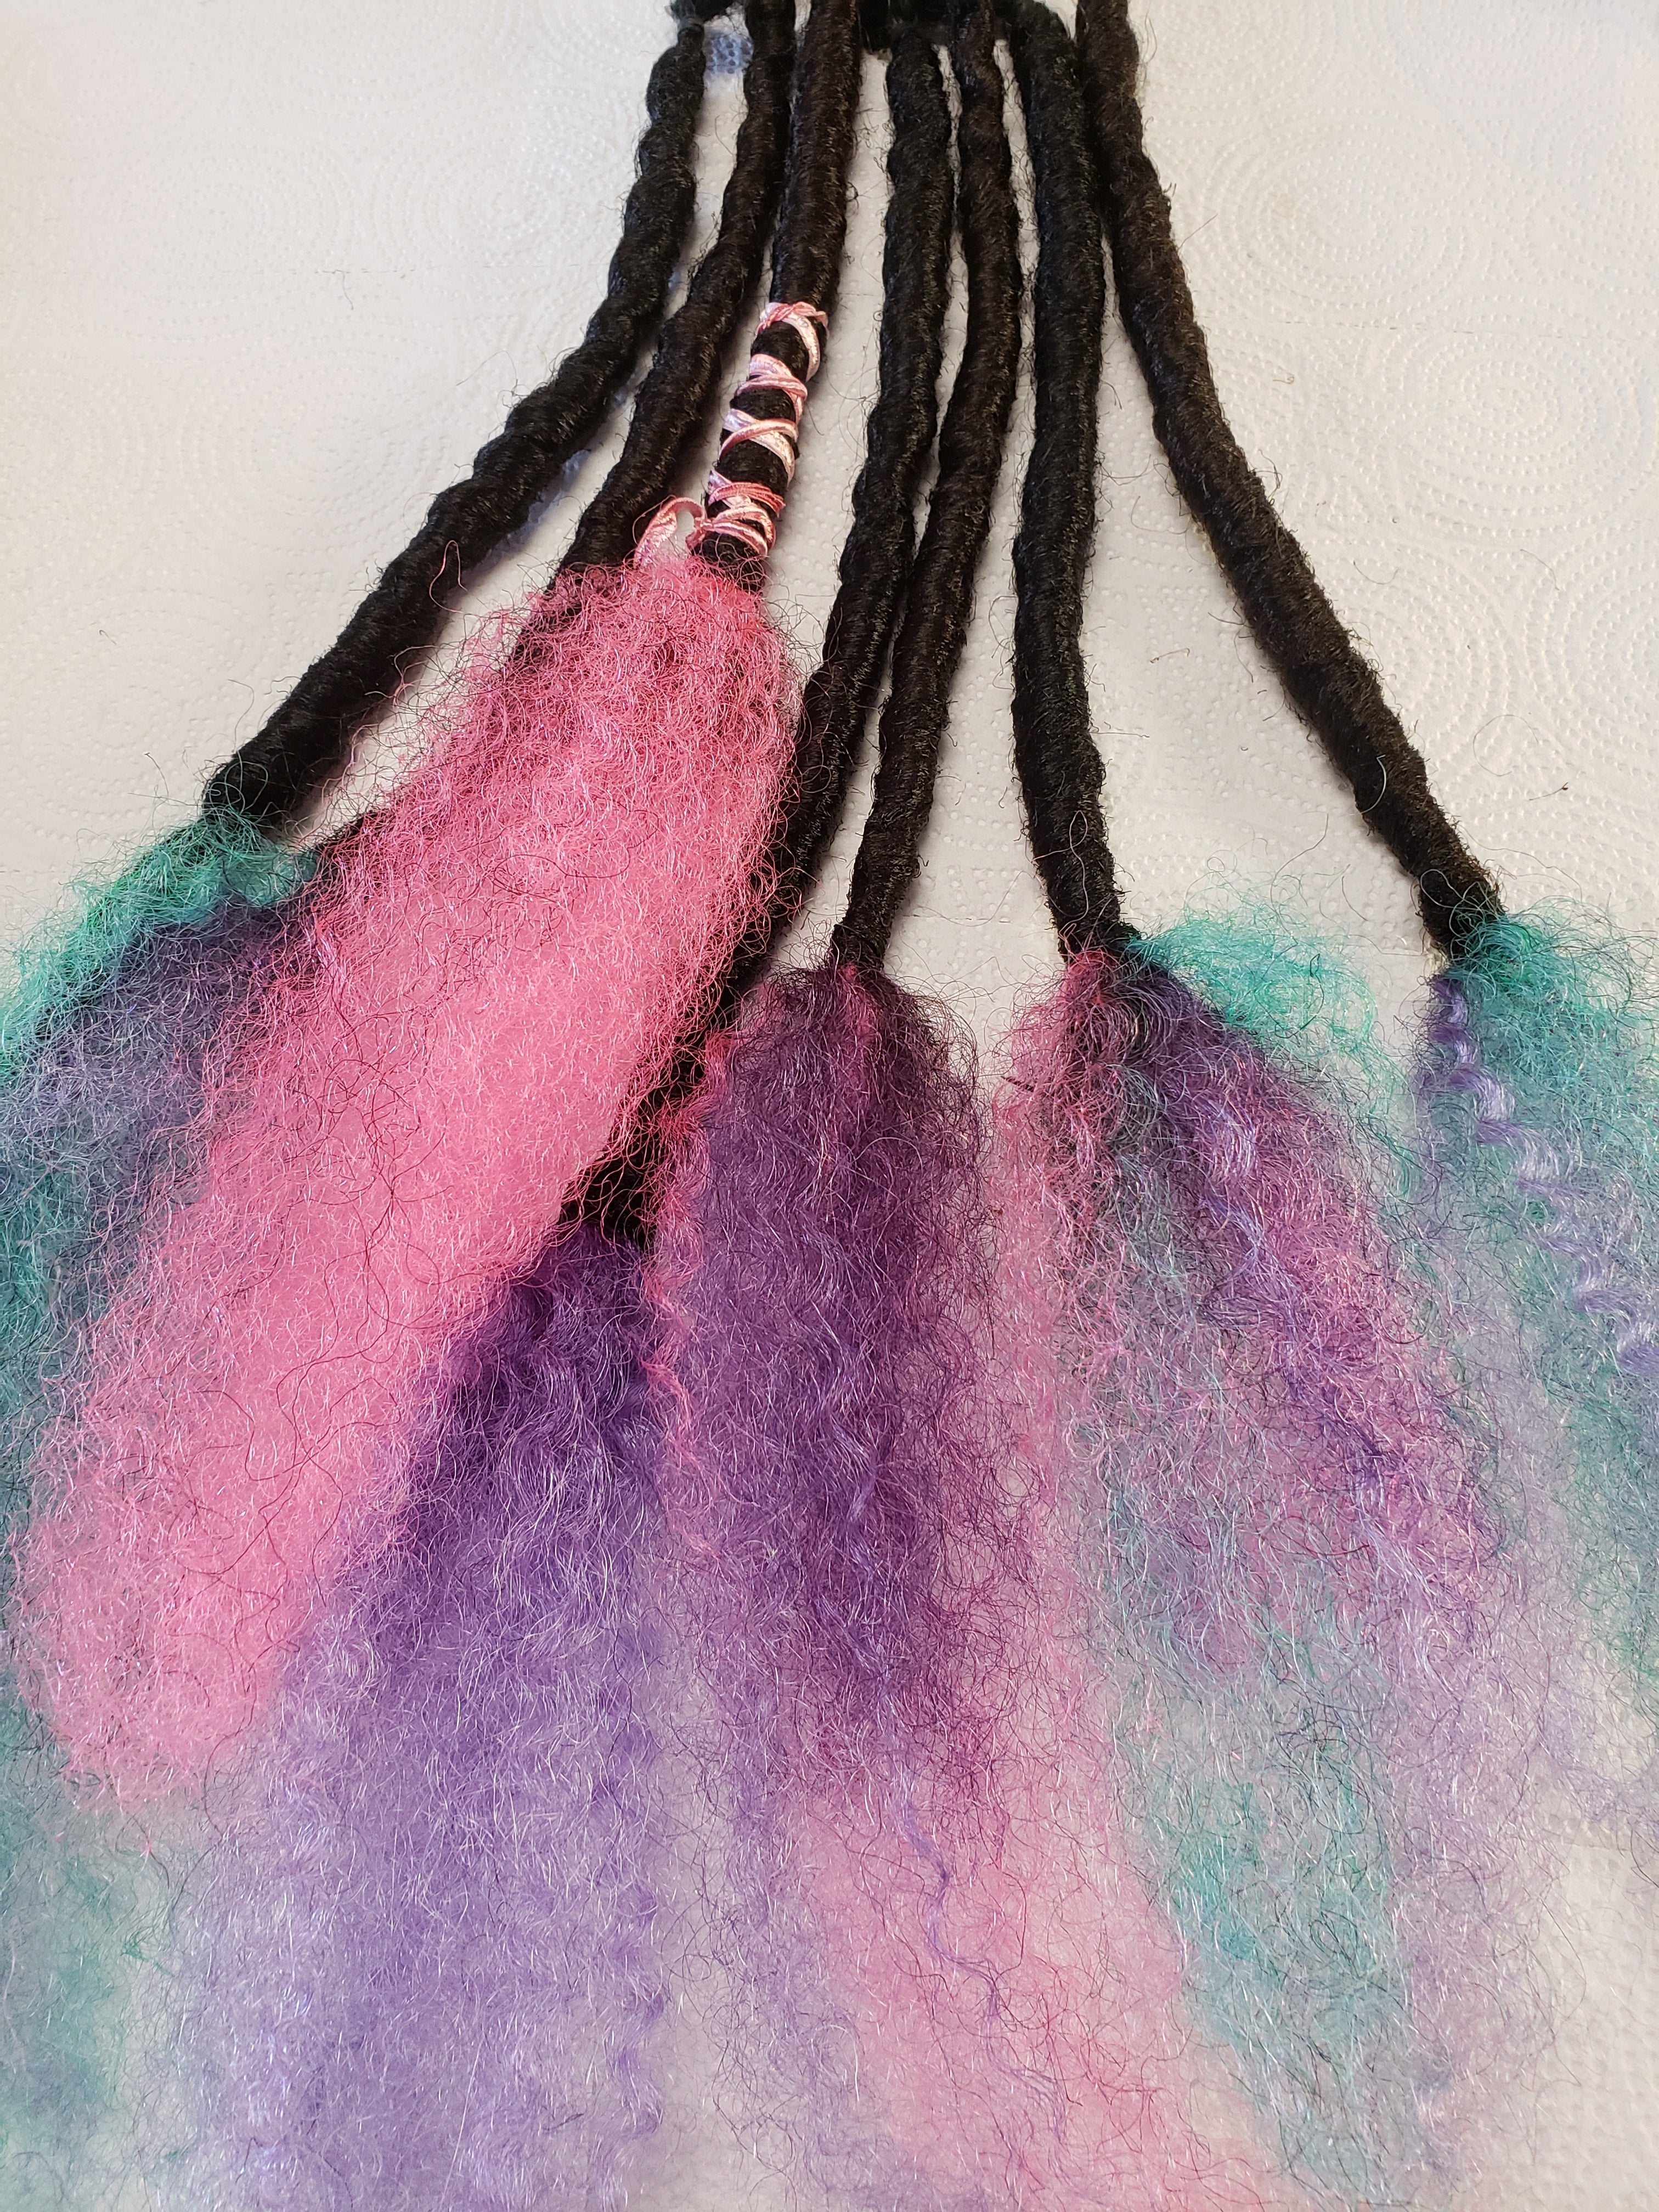 Synthetic Dreadlock set of 5 "Unicorn Tails" Marley Deads Hair